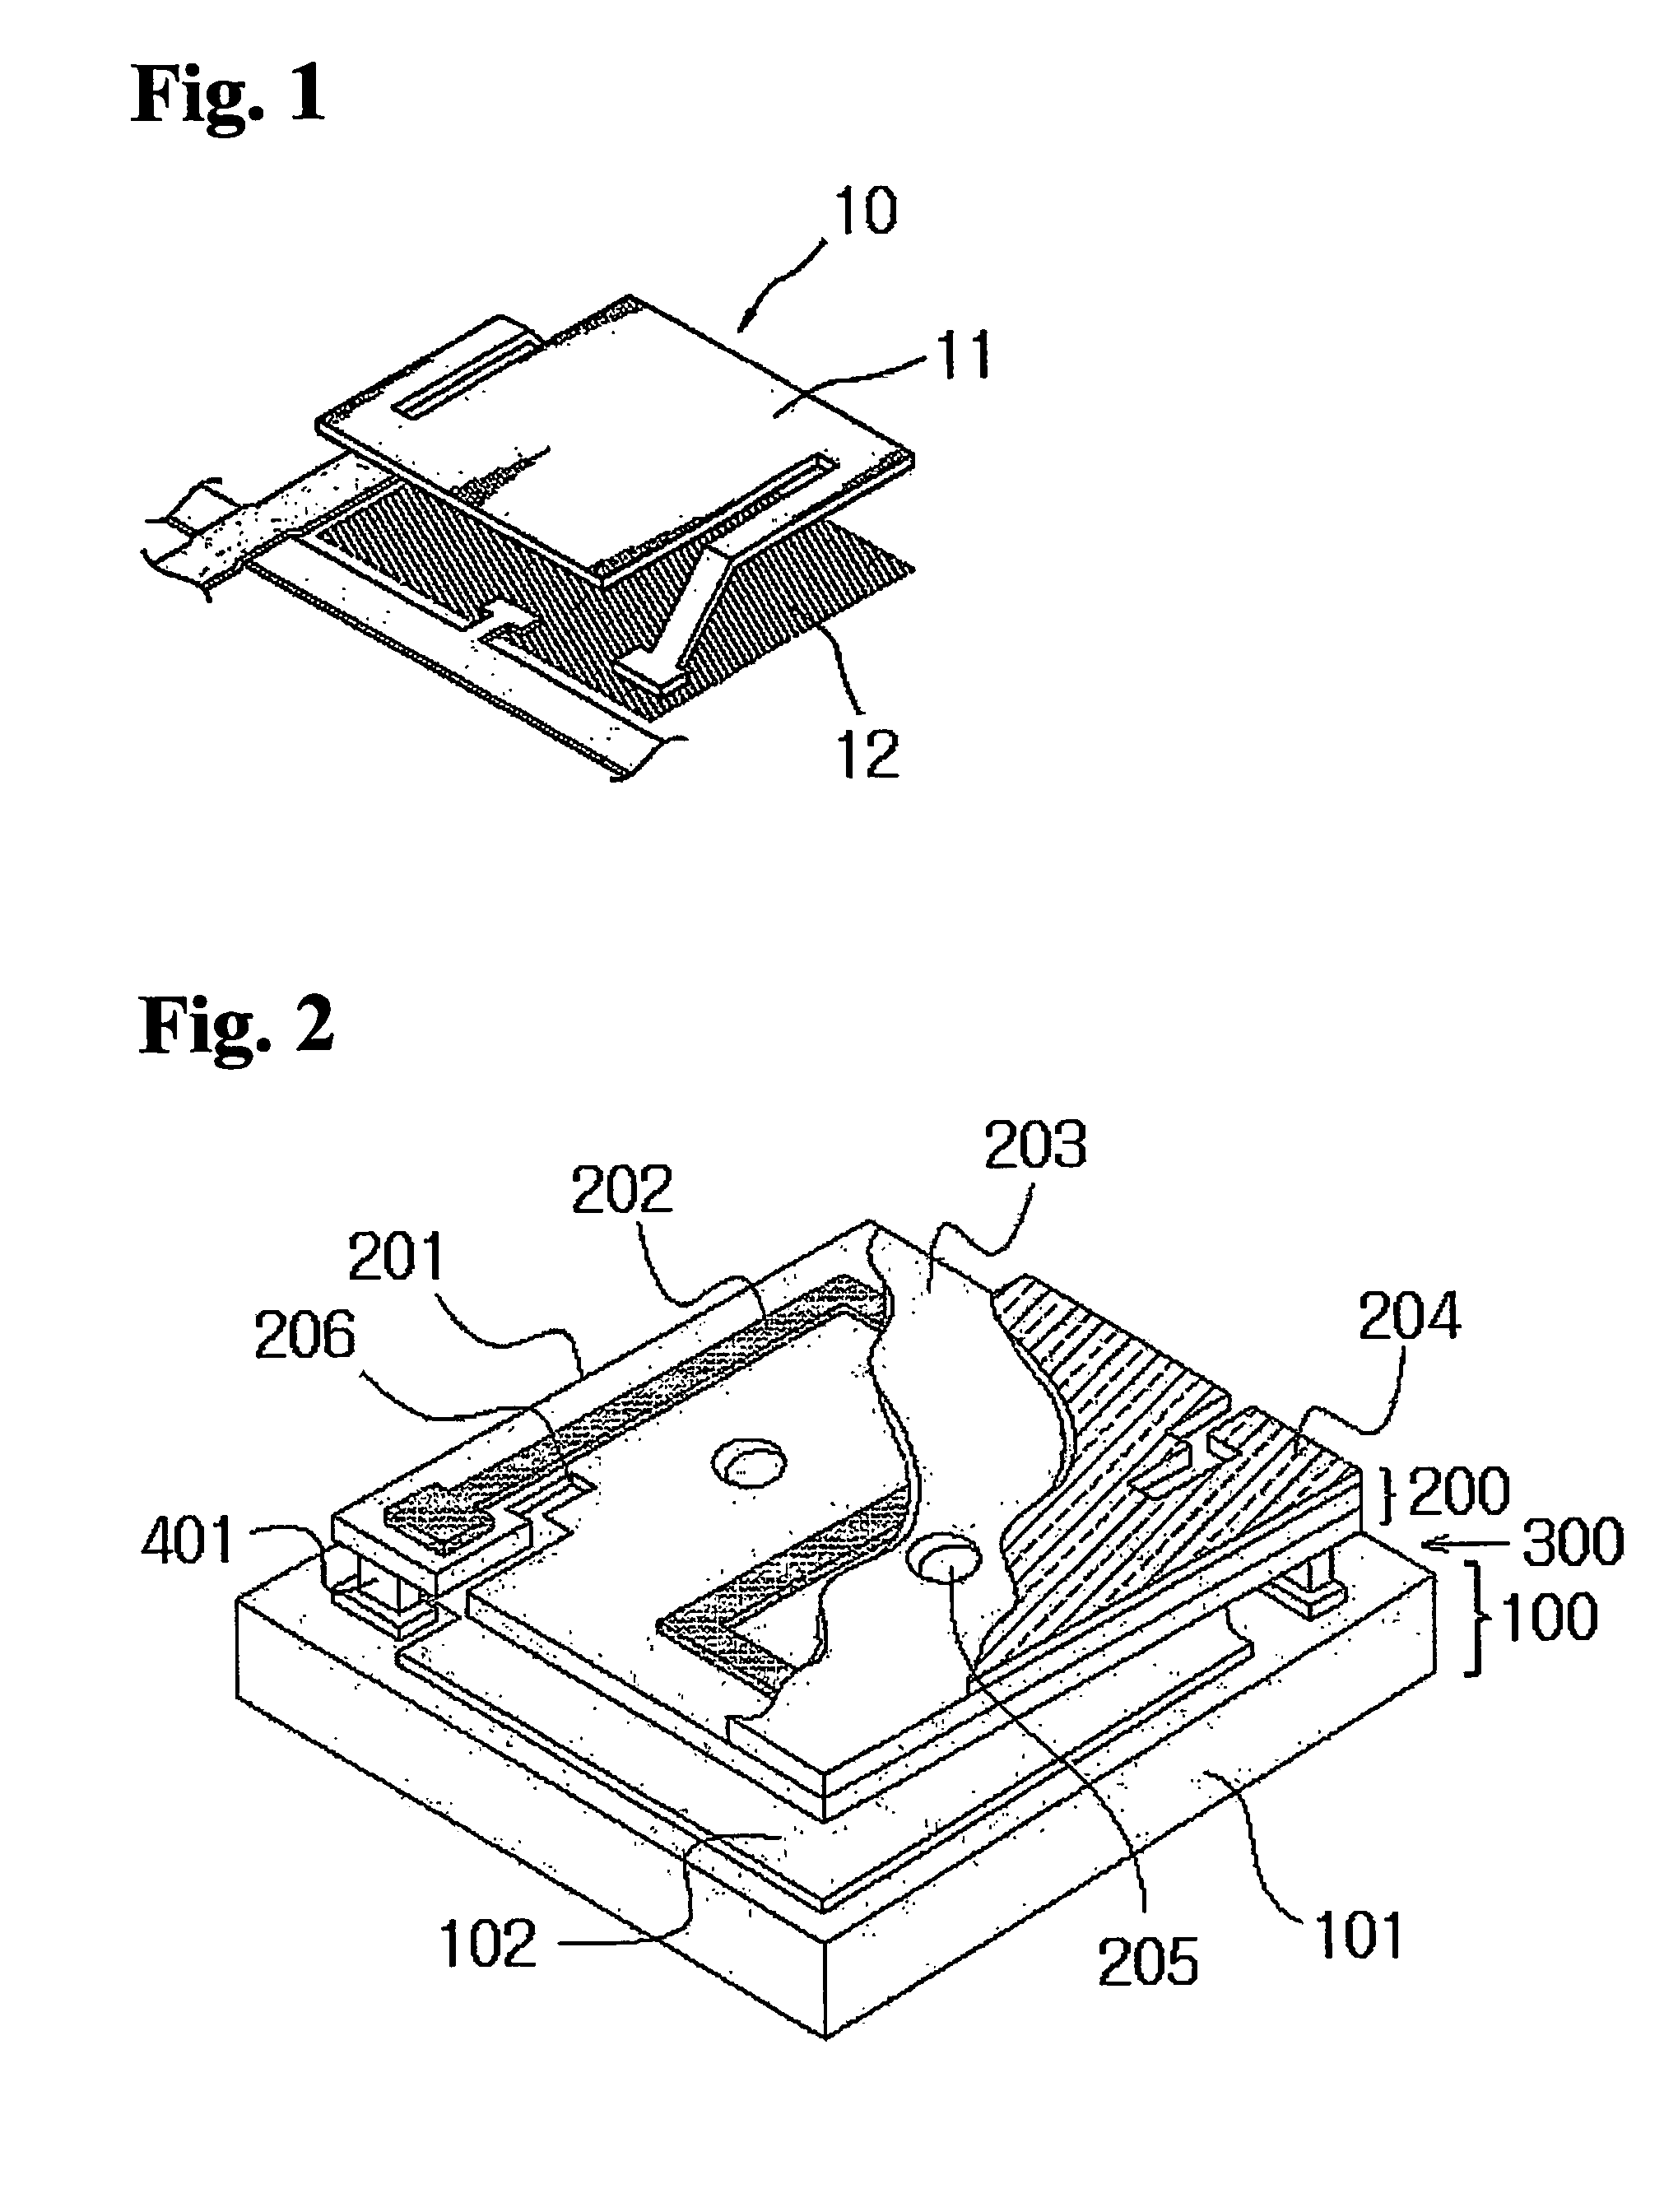 Bolometric infrared sensor having two-layer structure and method for manufacturing the same